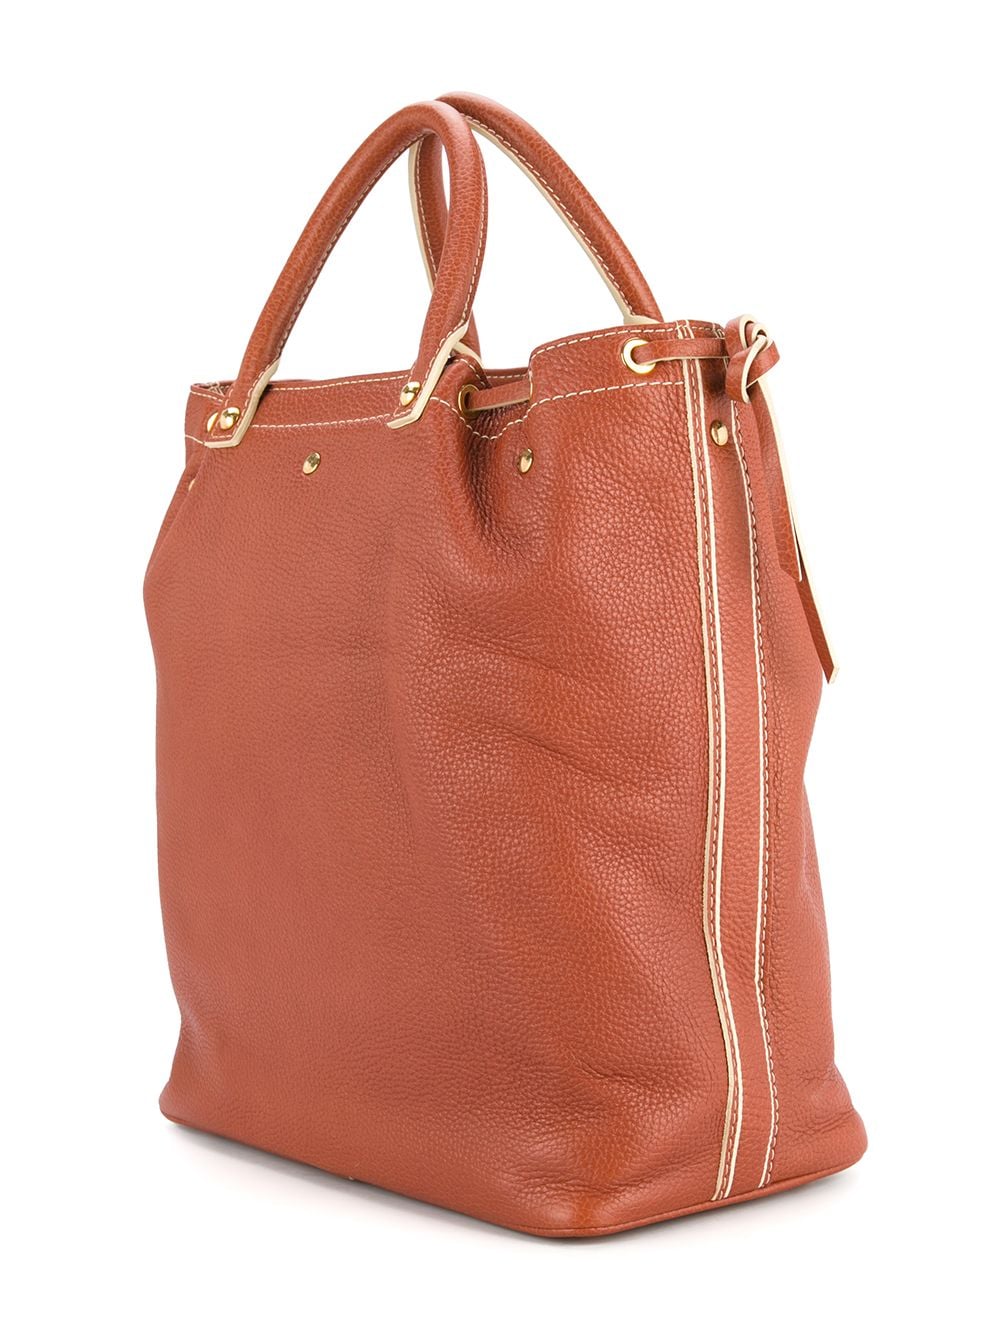 The Top Choice for 'Trunks & Bags' Shoe Tobago Leather Tote Bag Louis  Vuitton